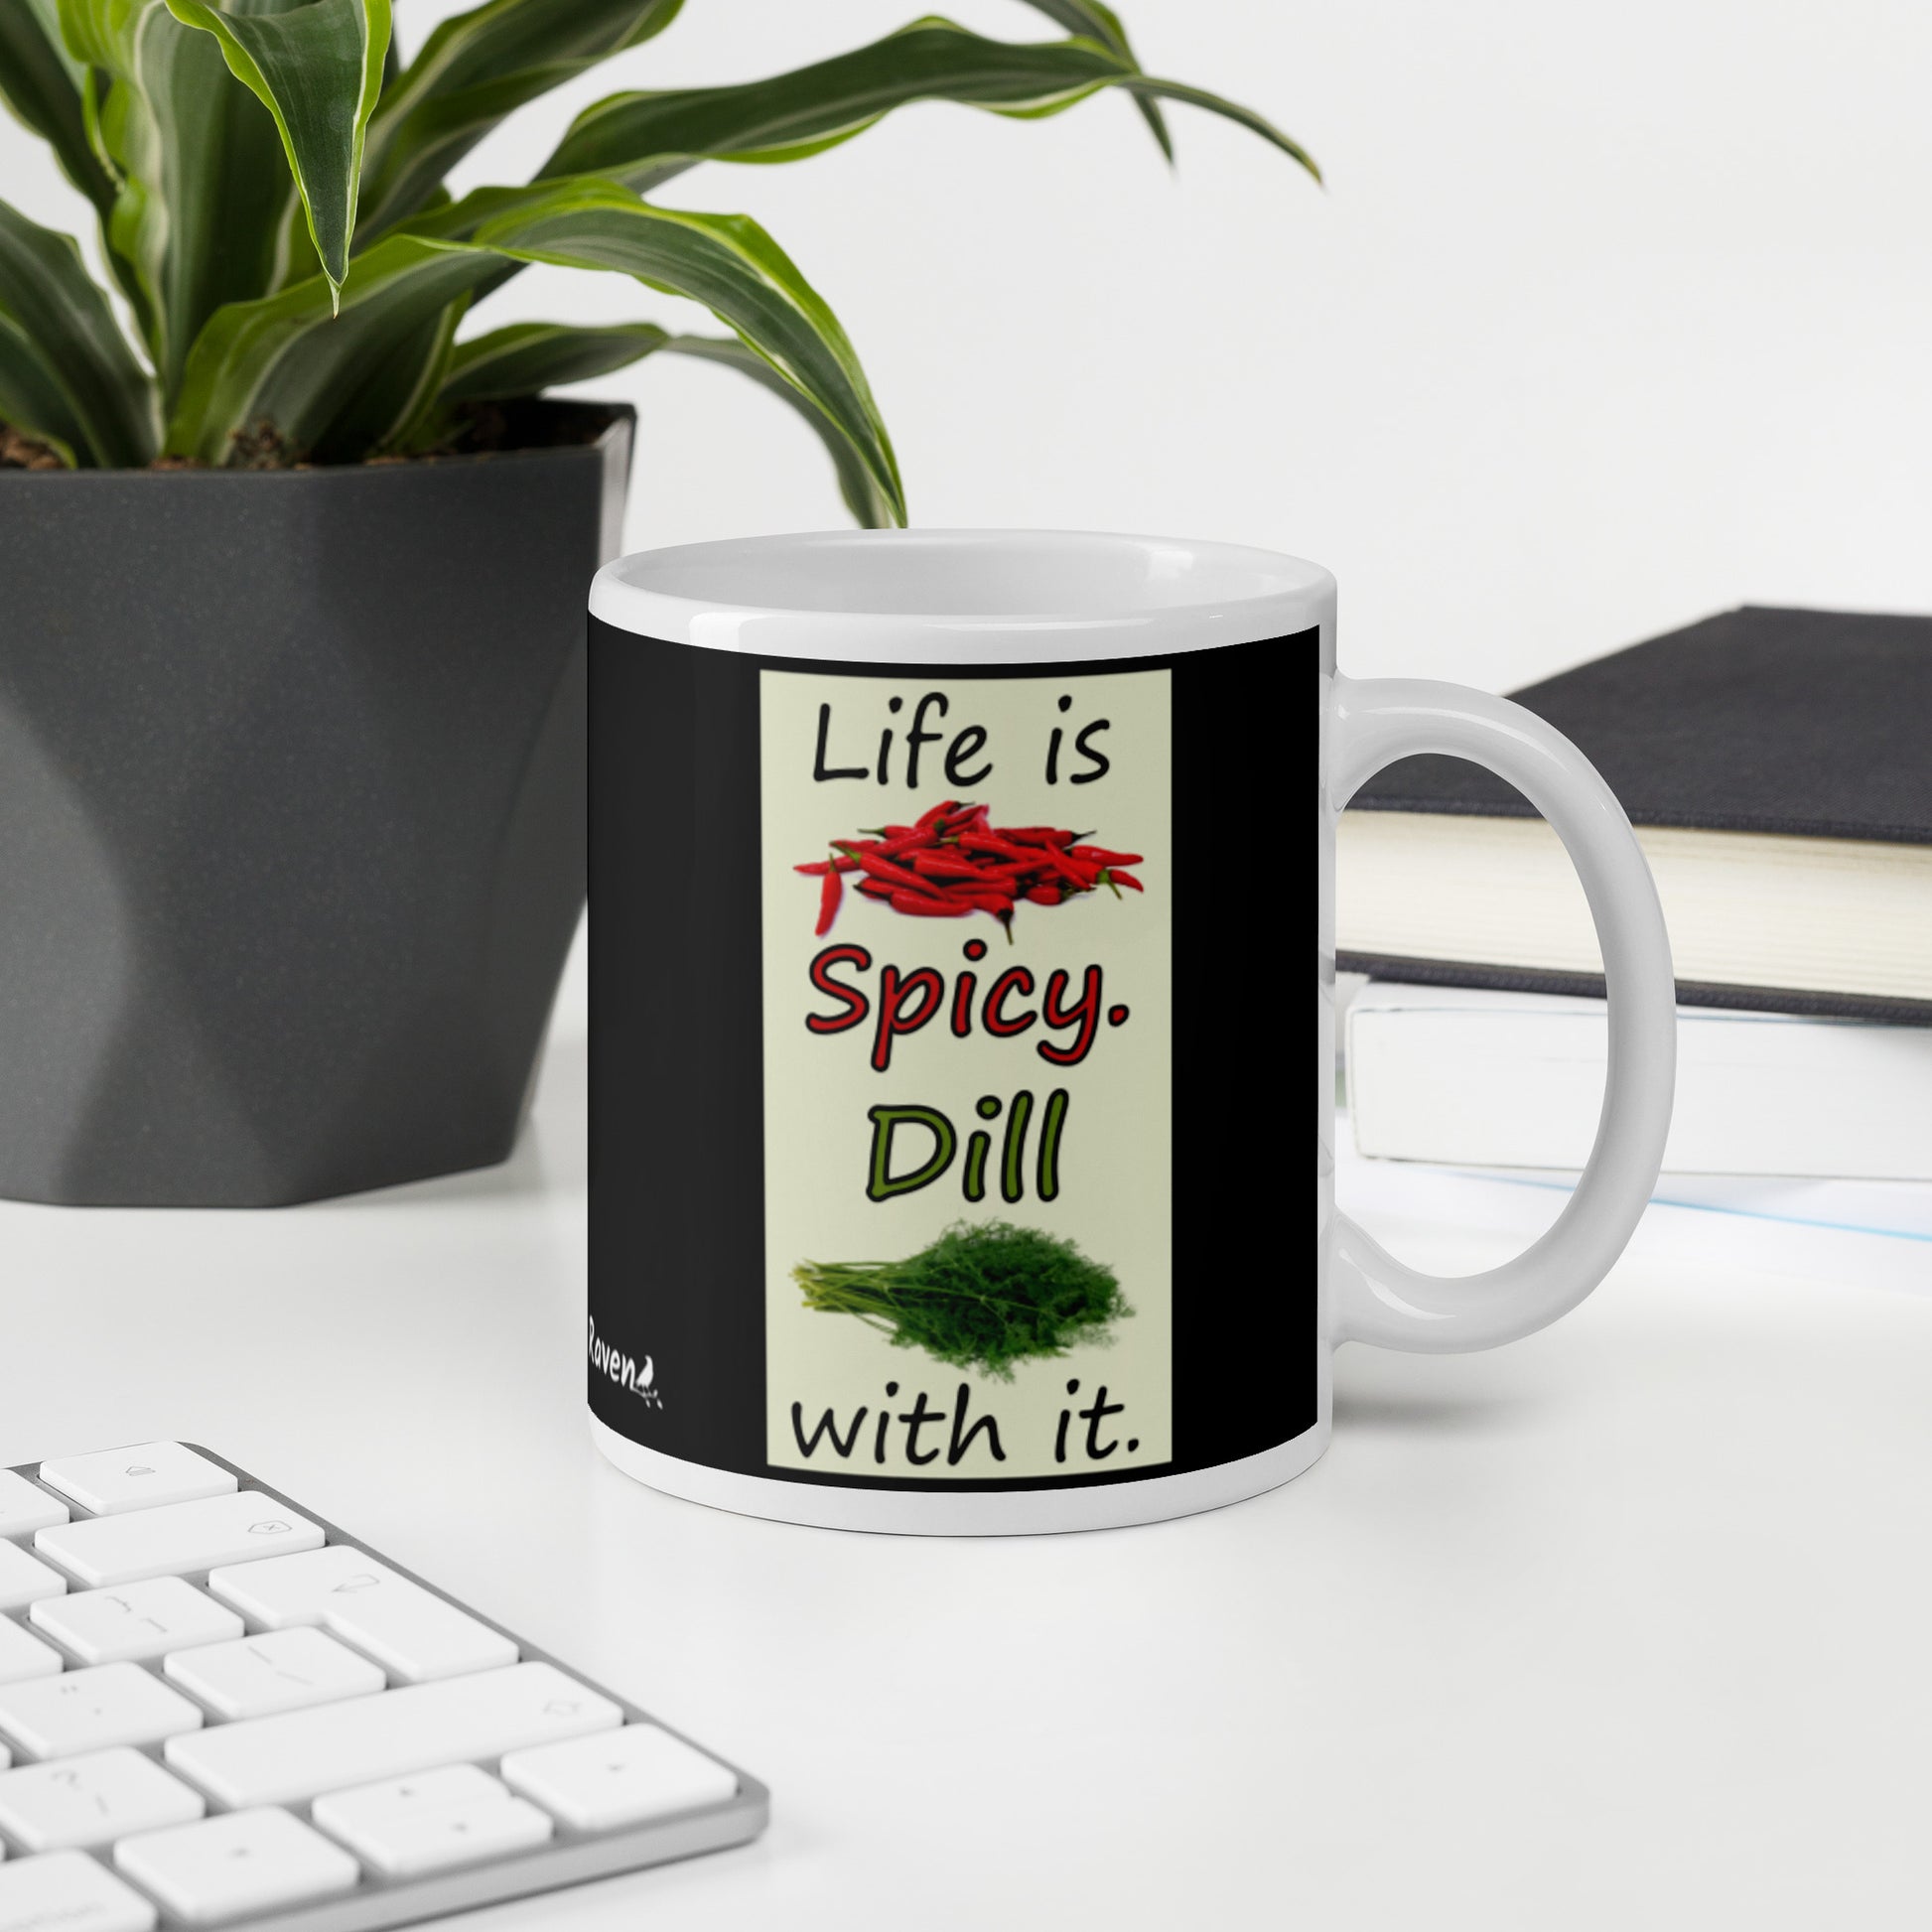 11 ounce white glossy ceramic mug. Life is Spicy. Dill with it text. Image of chili peppers and dill weed on a light yellow rectangle. Black background on mug. Shown on desktop by potted plant and keyboard.